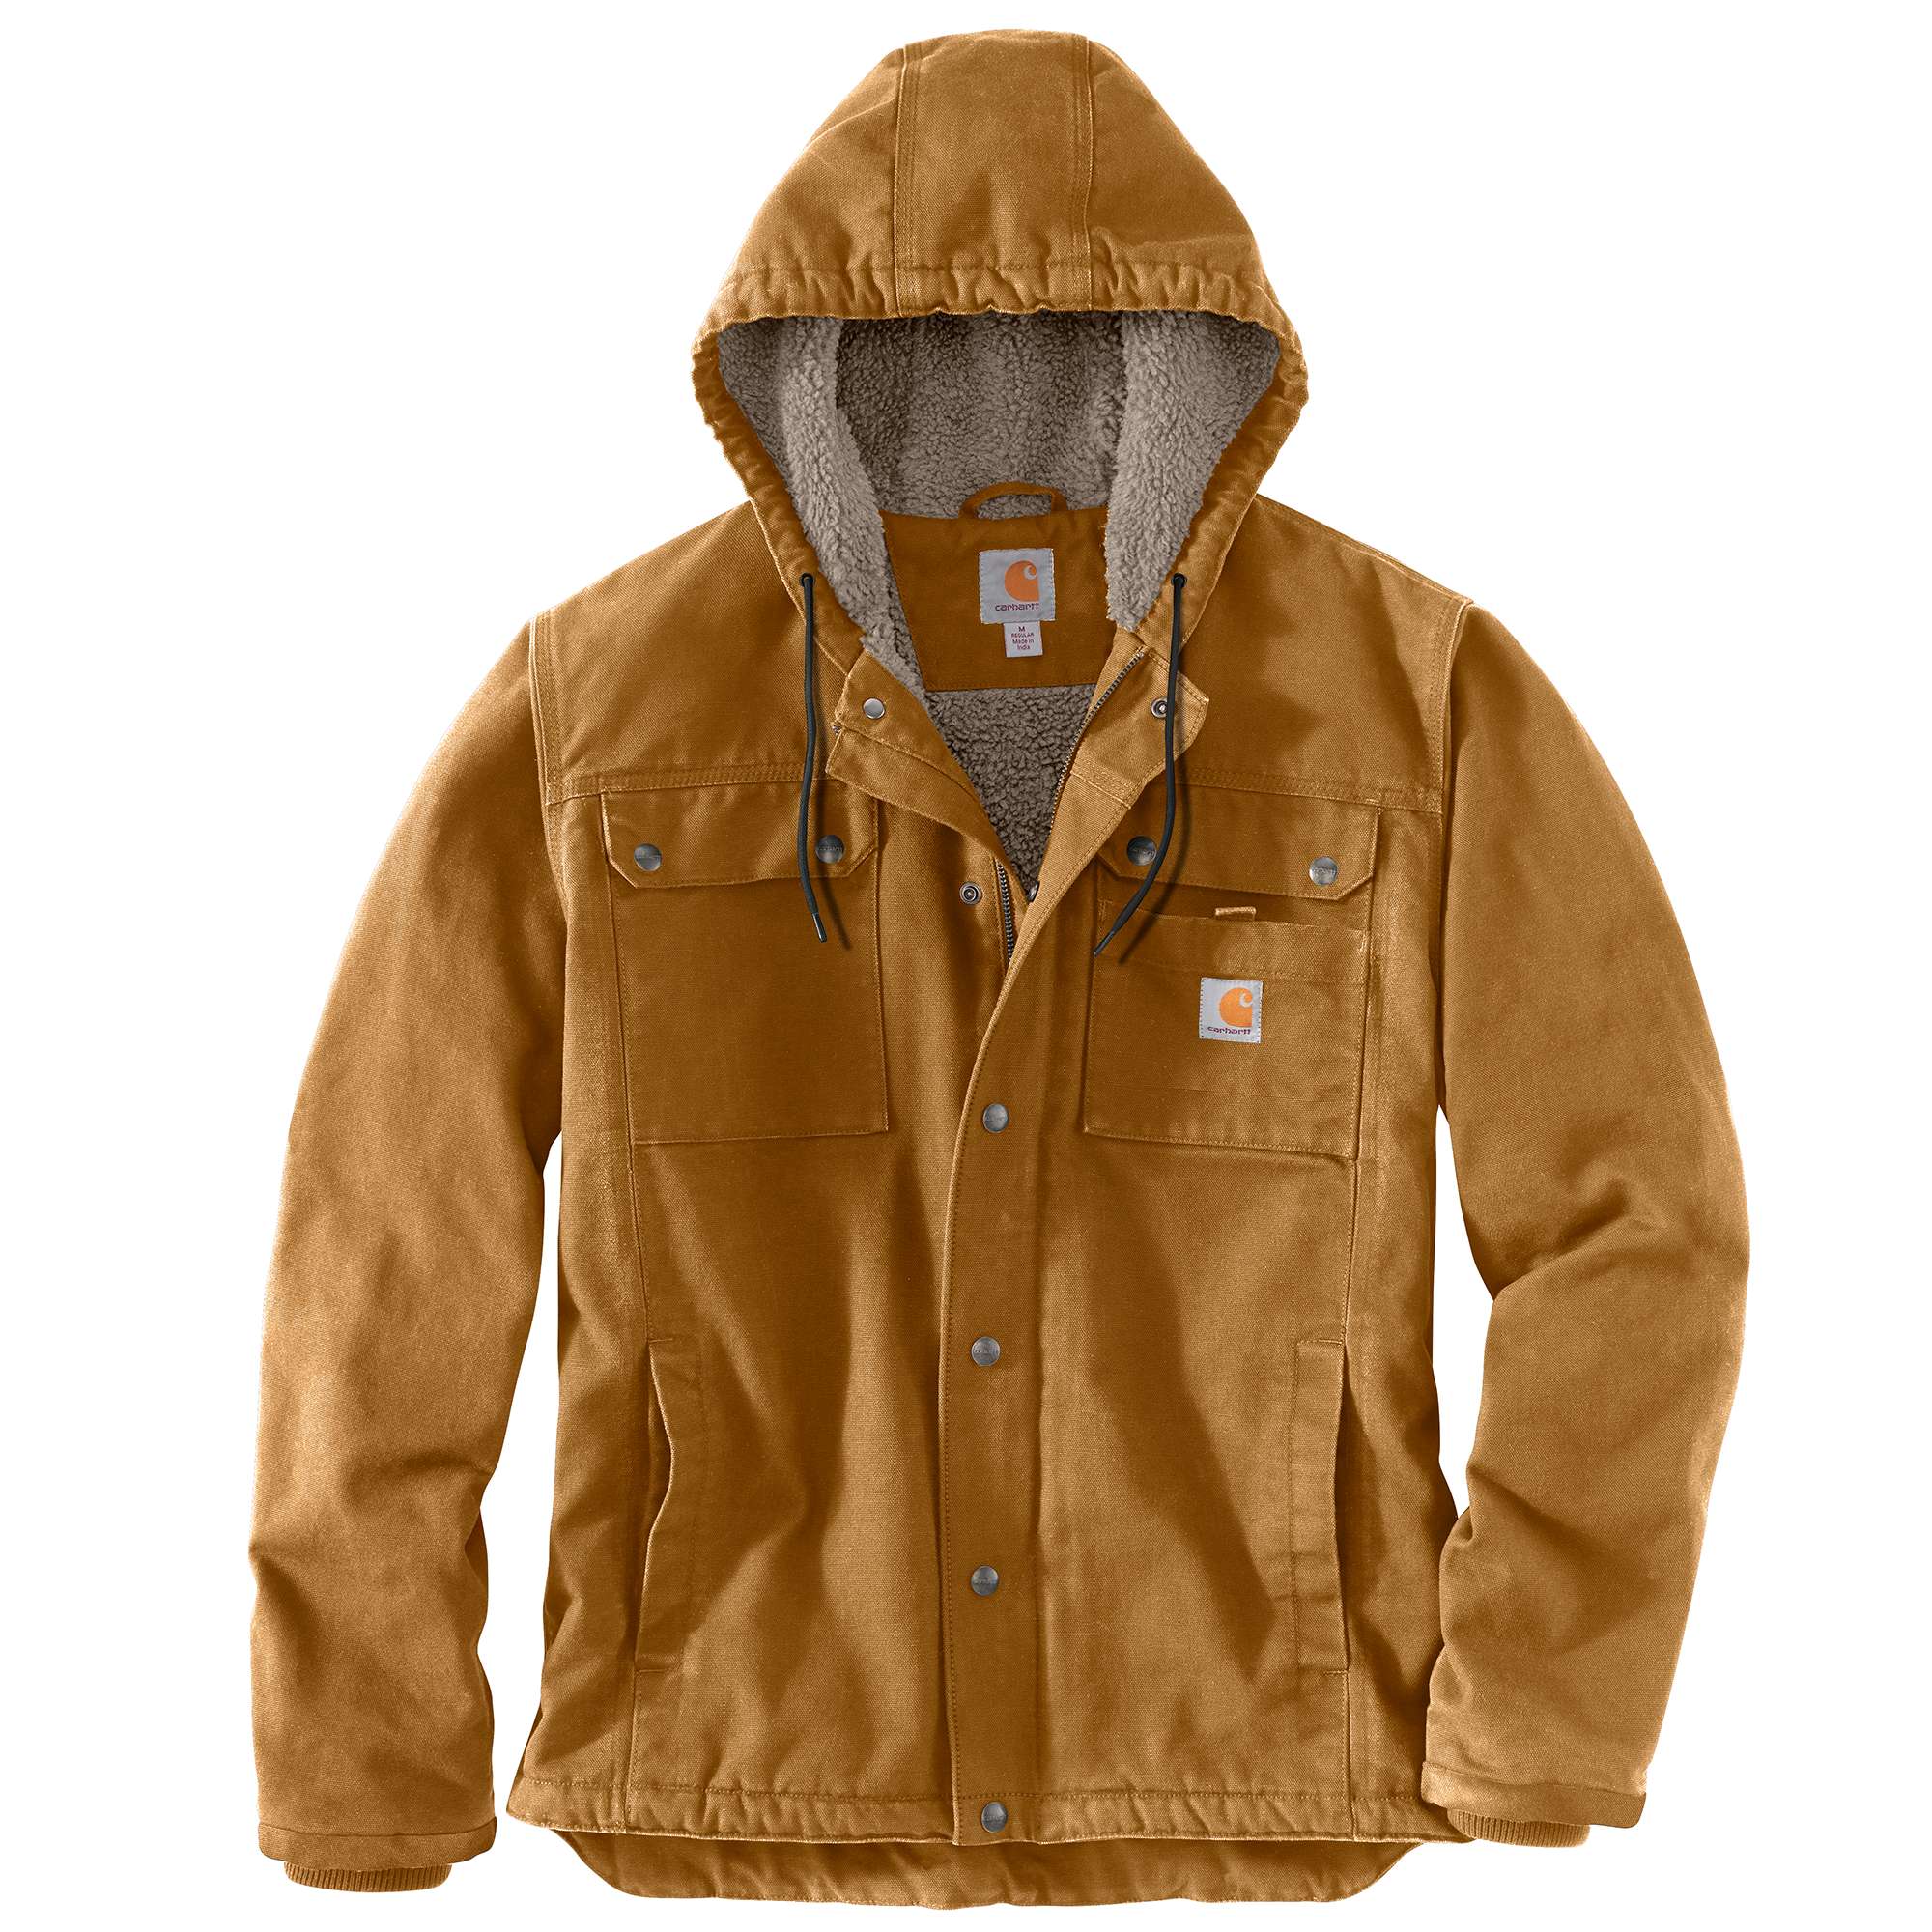 Carhartt Yukon Extremes Active Insulated Jacket at Tractor Supply Co.